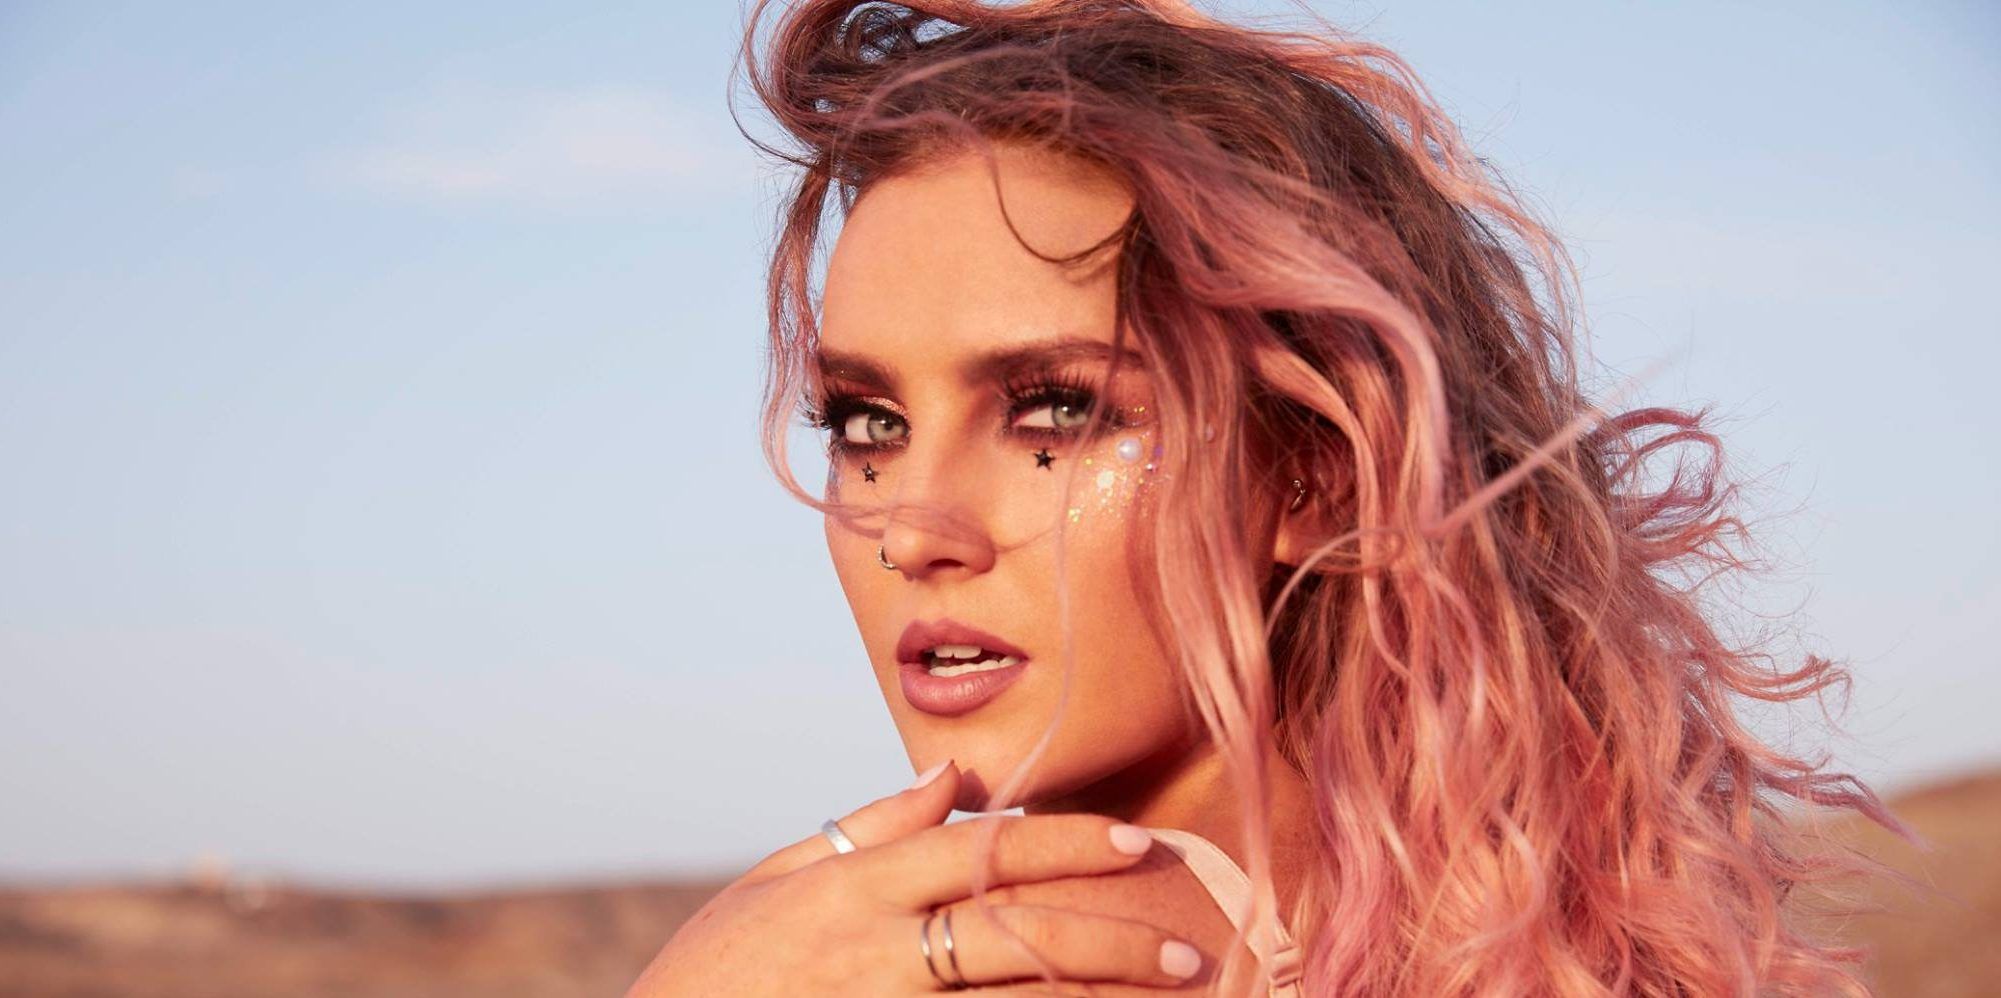 15 Photos Of Perrie Edwards That Prove She S Stunning